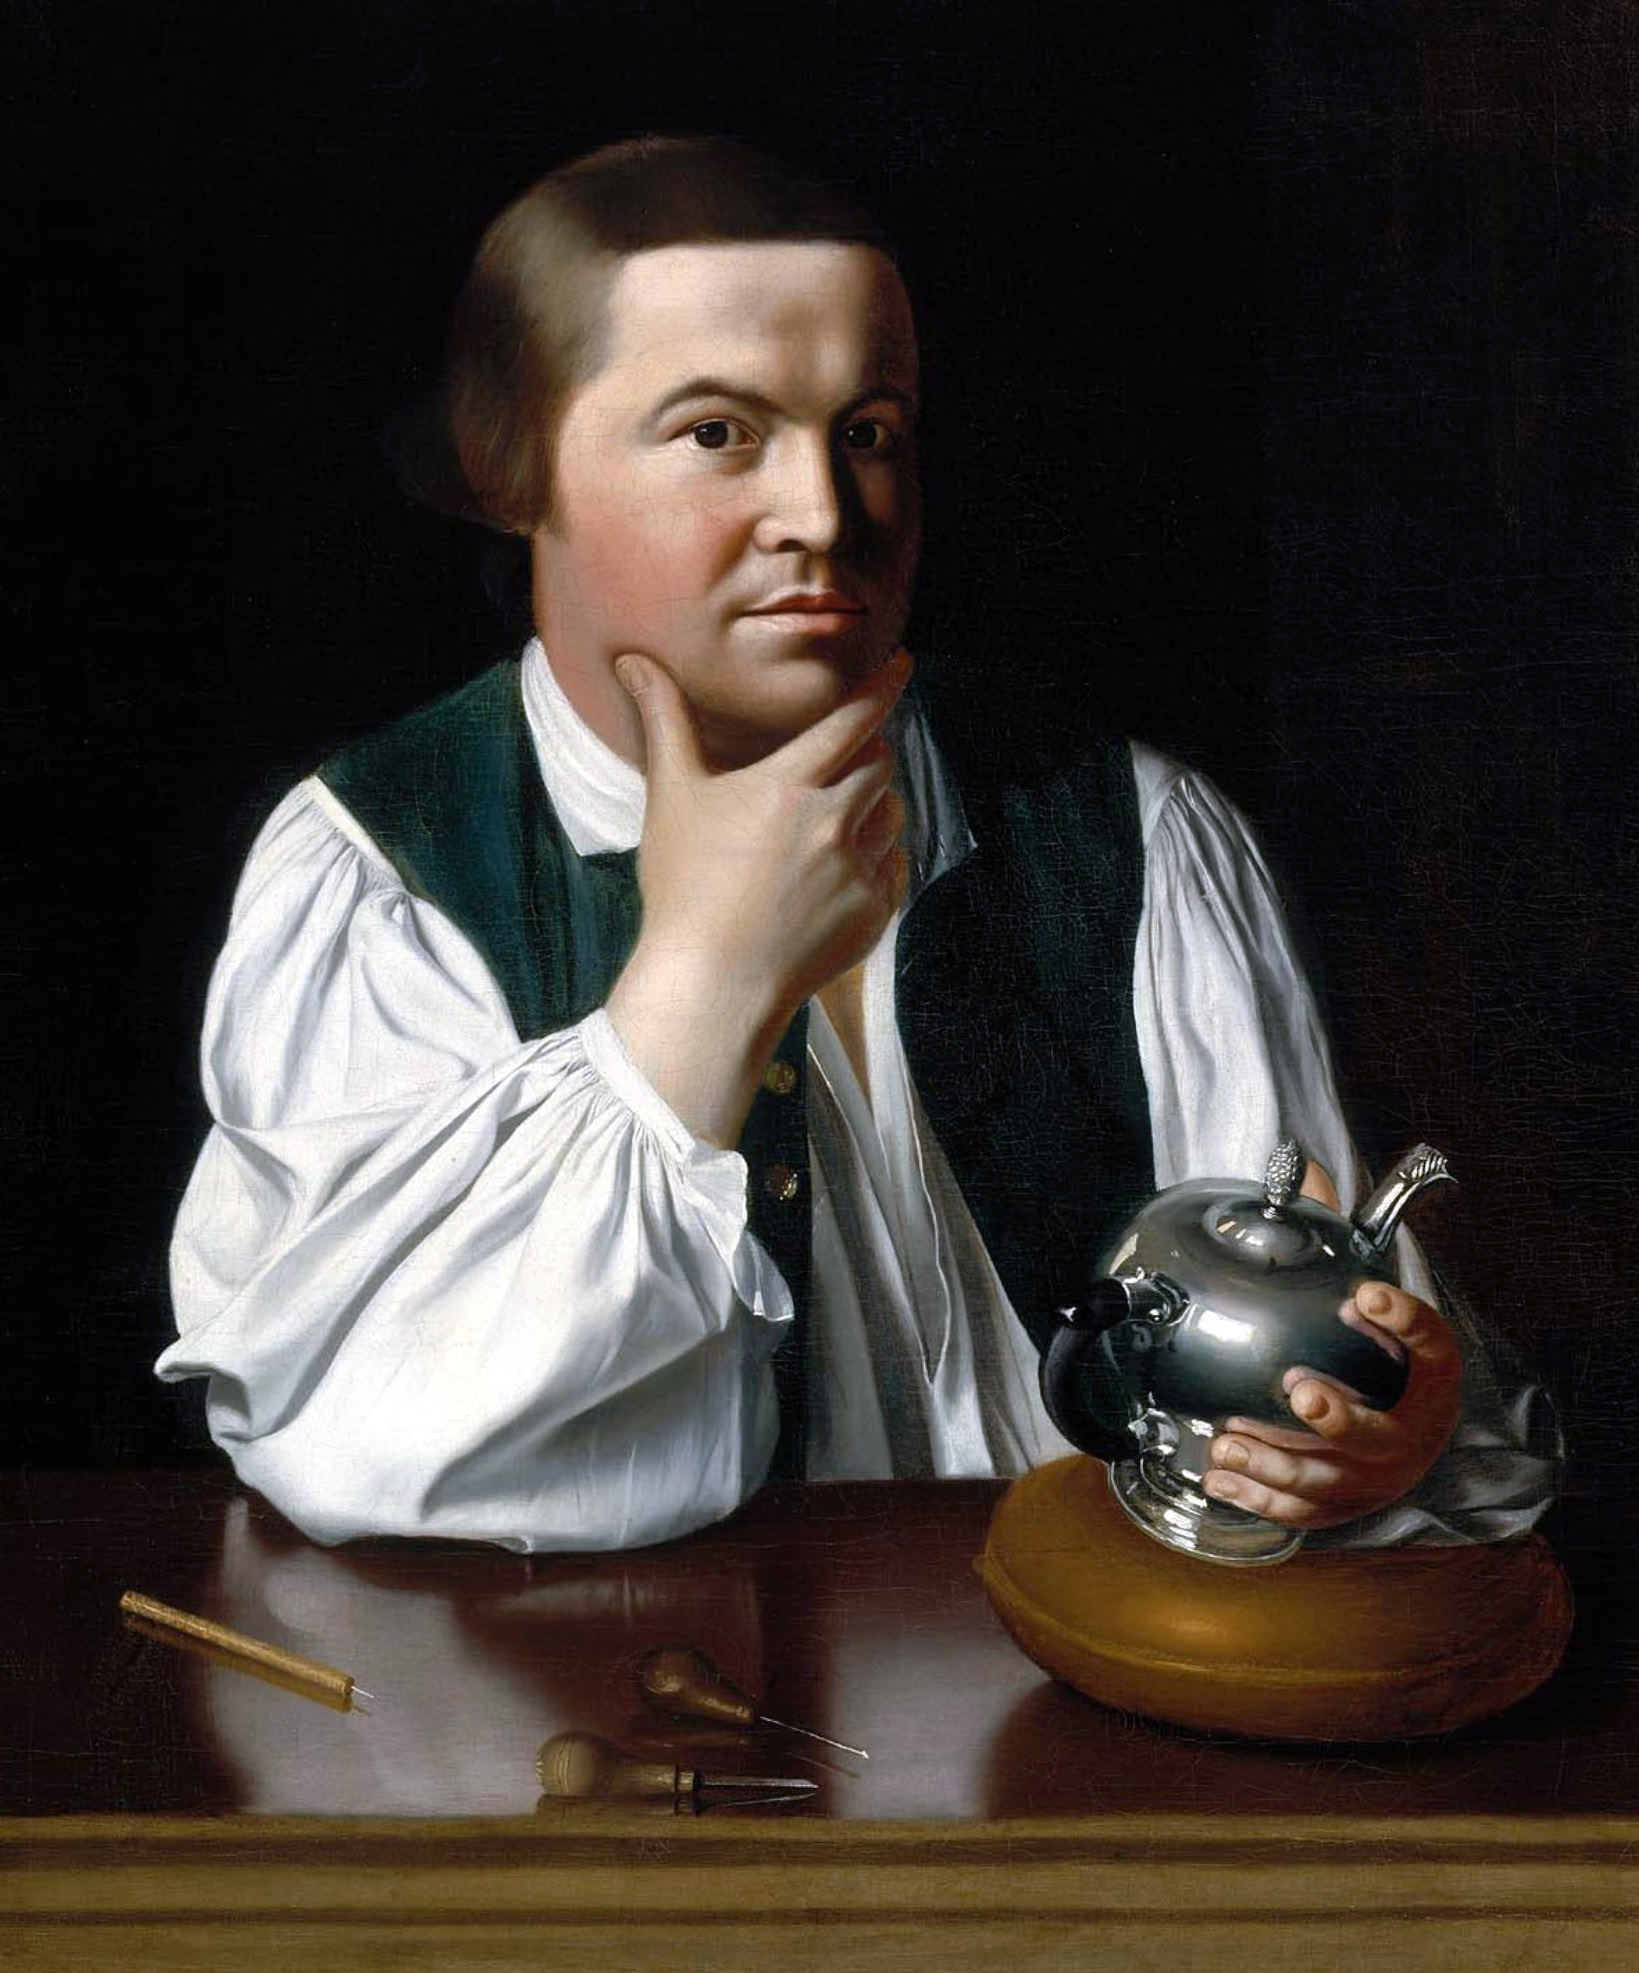 Silversmith Paul Revere, famous for the horseback ride at Lexington and Concord image - Free ...